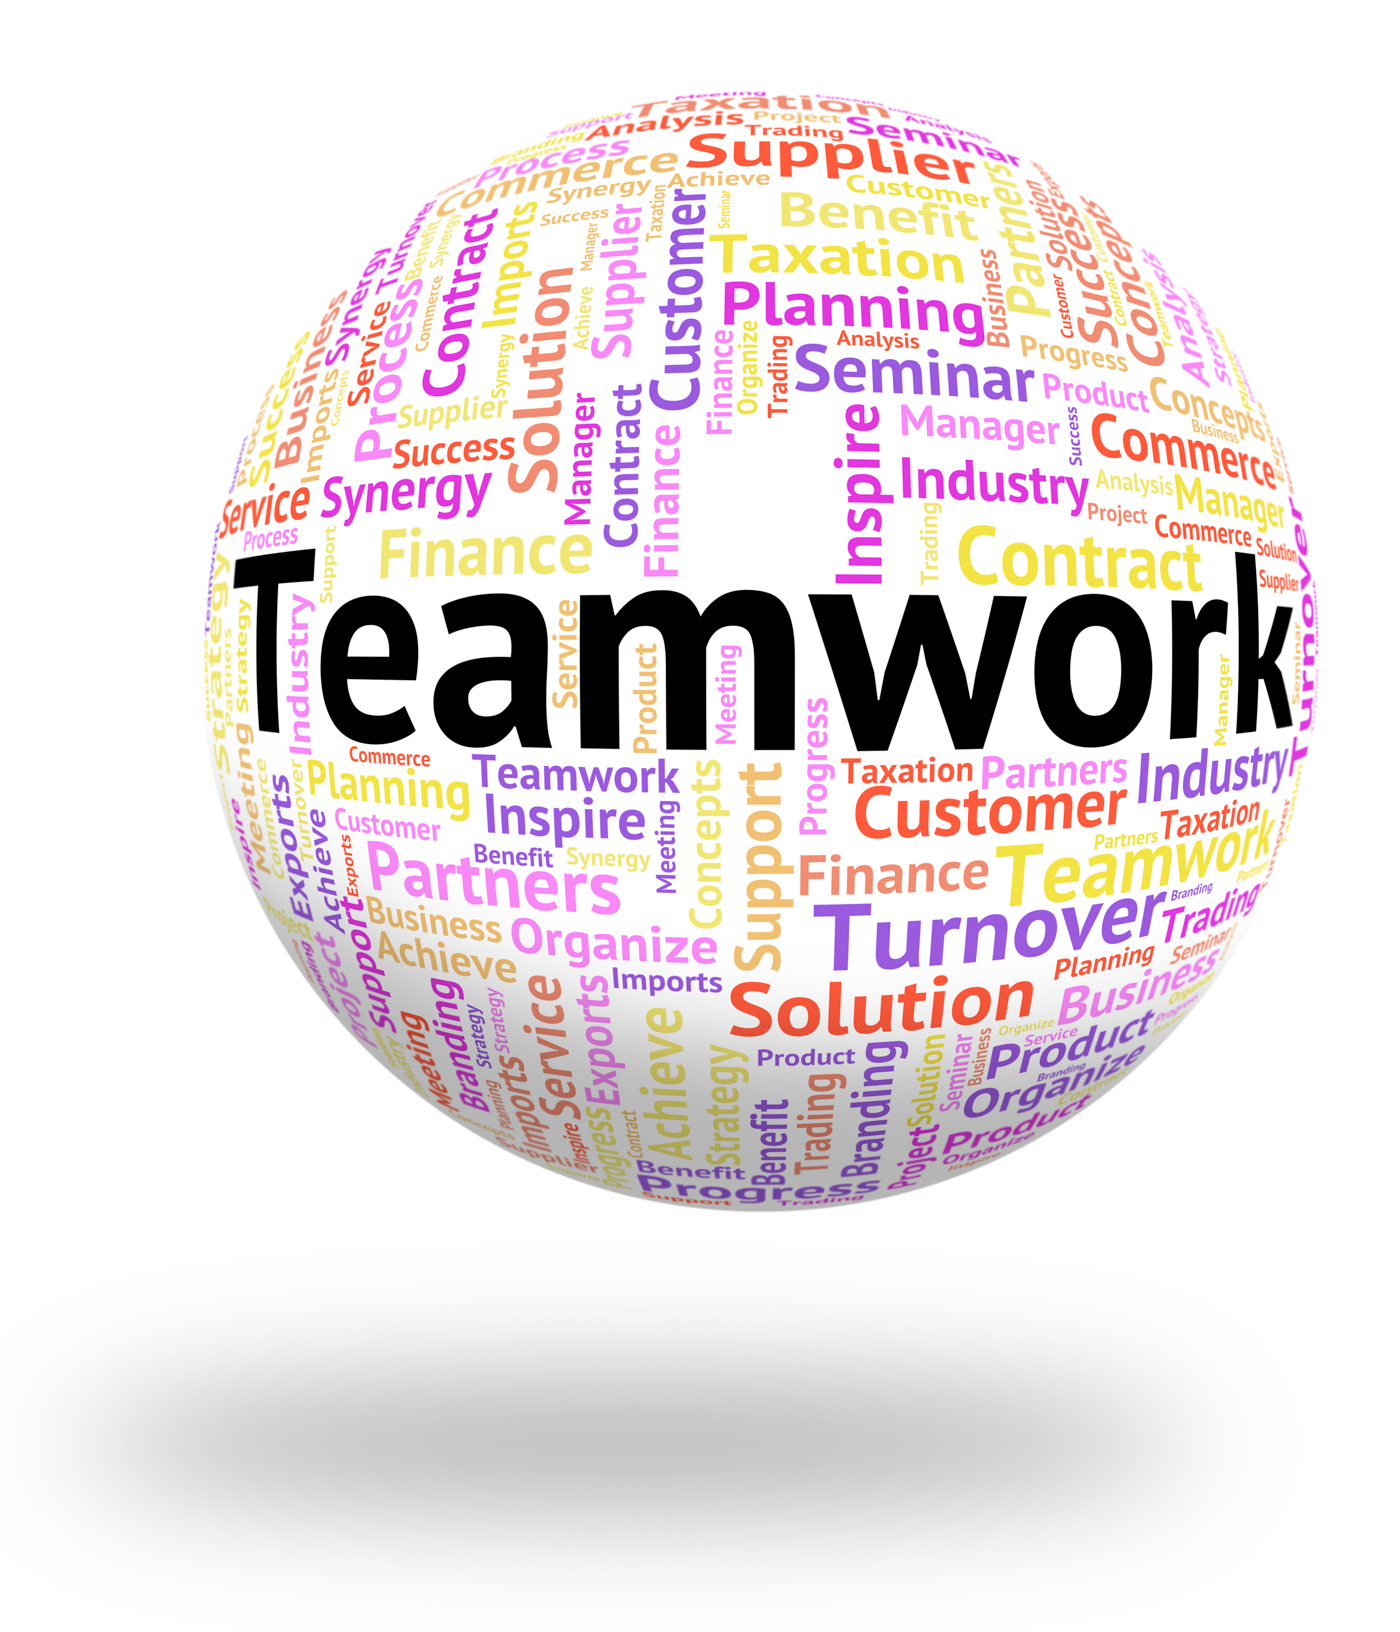 Free photo: Teamwork Word Means Cooperation Networking And Together ...